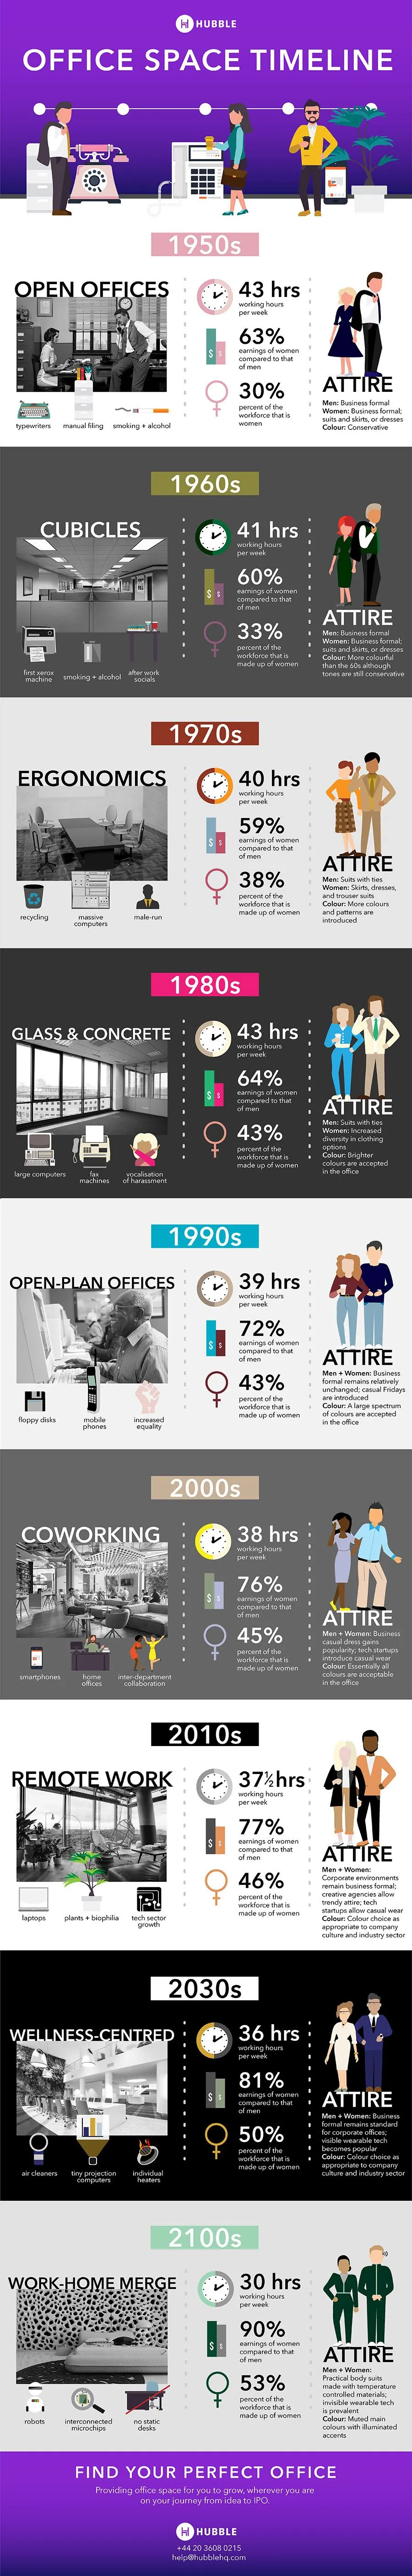 Office Space Timeline: Past, Present, and Future [INFOGRAPHIC]